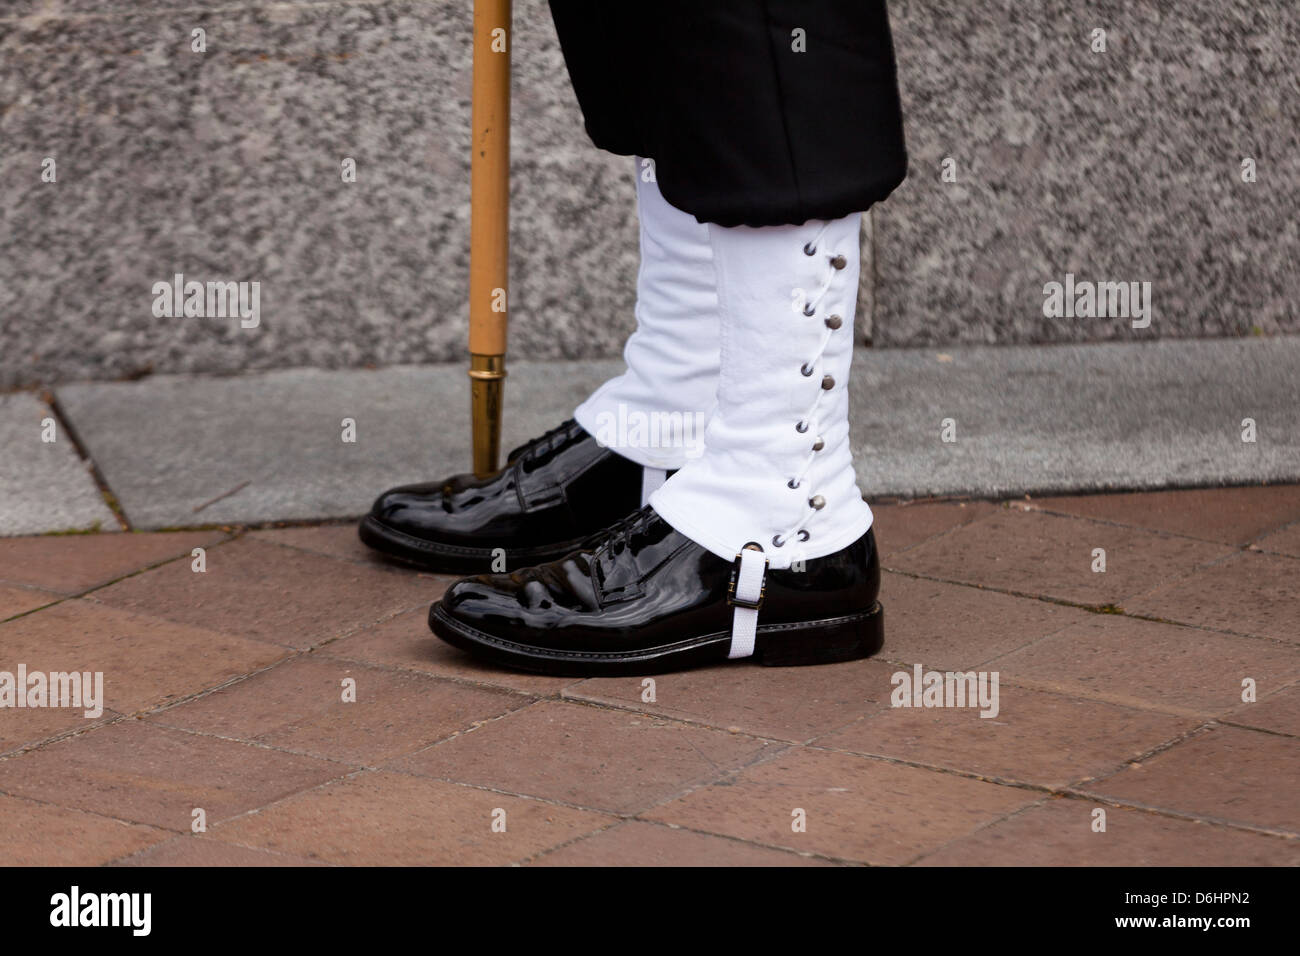 US Navy Ceremonial guard boots Stock Photo